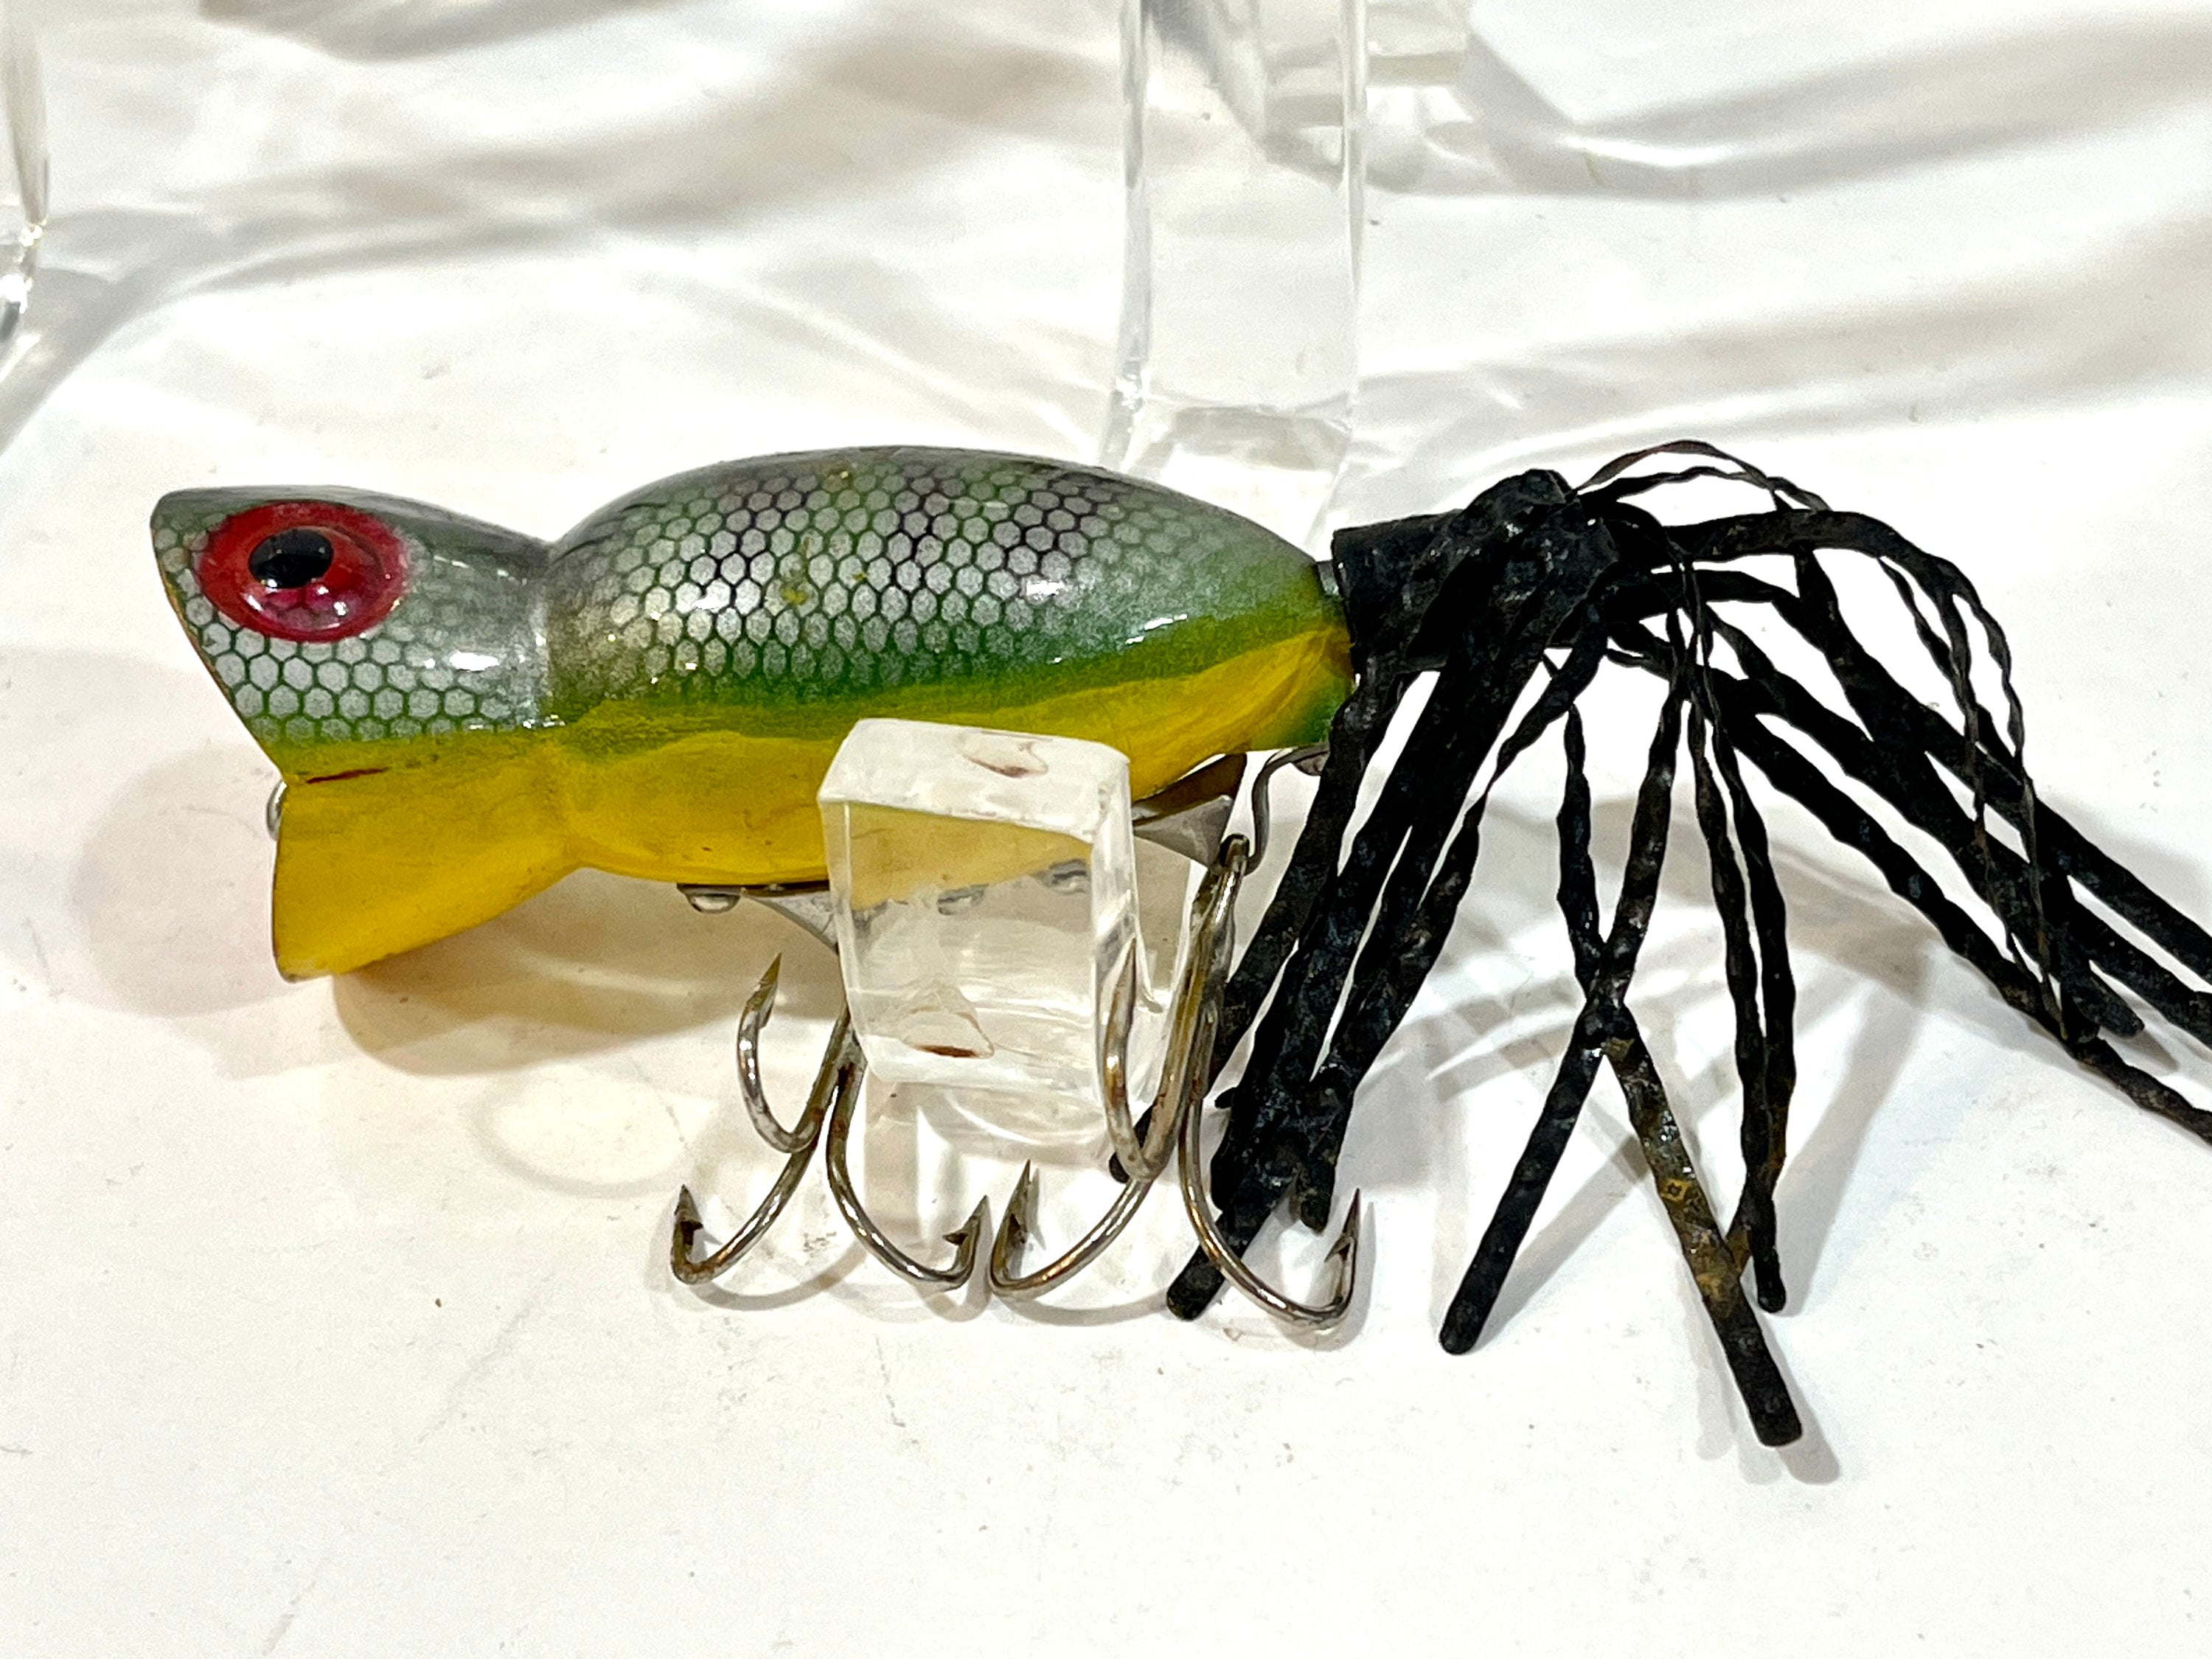 Vintage Lure, Fred Arbogast, Hula Popper, Fishing Lure, Vintage Bass Lure,  Spin Casting, Fishing Tackle, Jitterbug. Green Parrot, Gift Idea